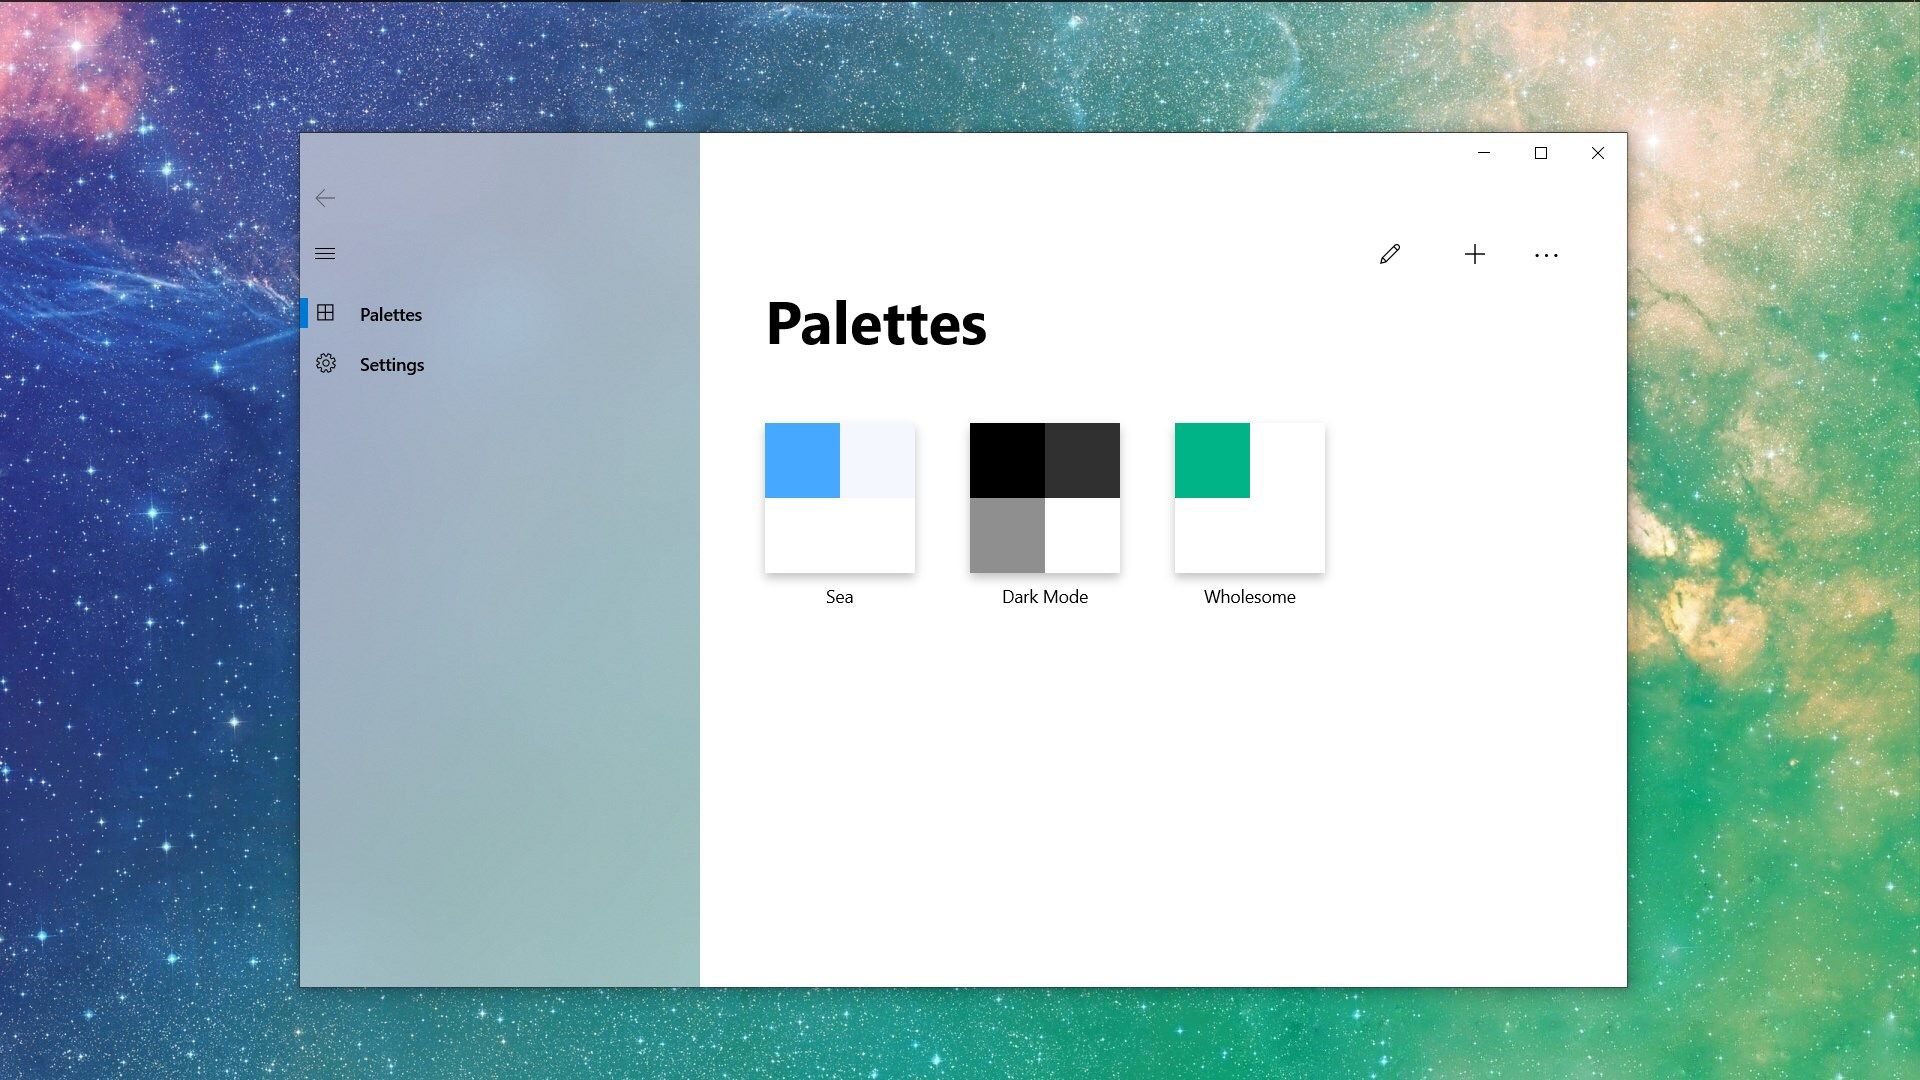 View all your palettes with a preview of each of them